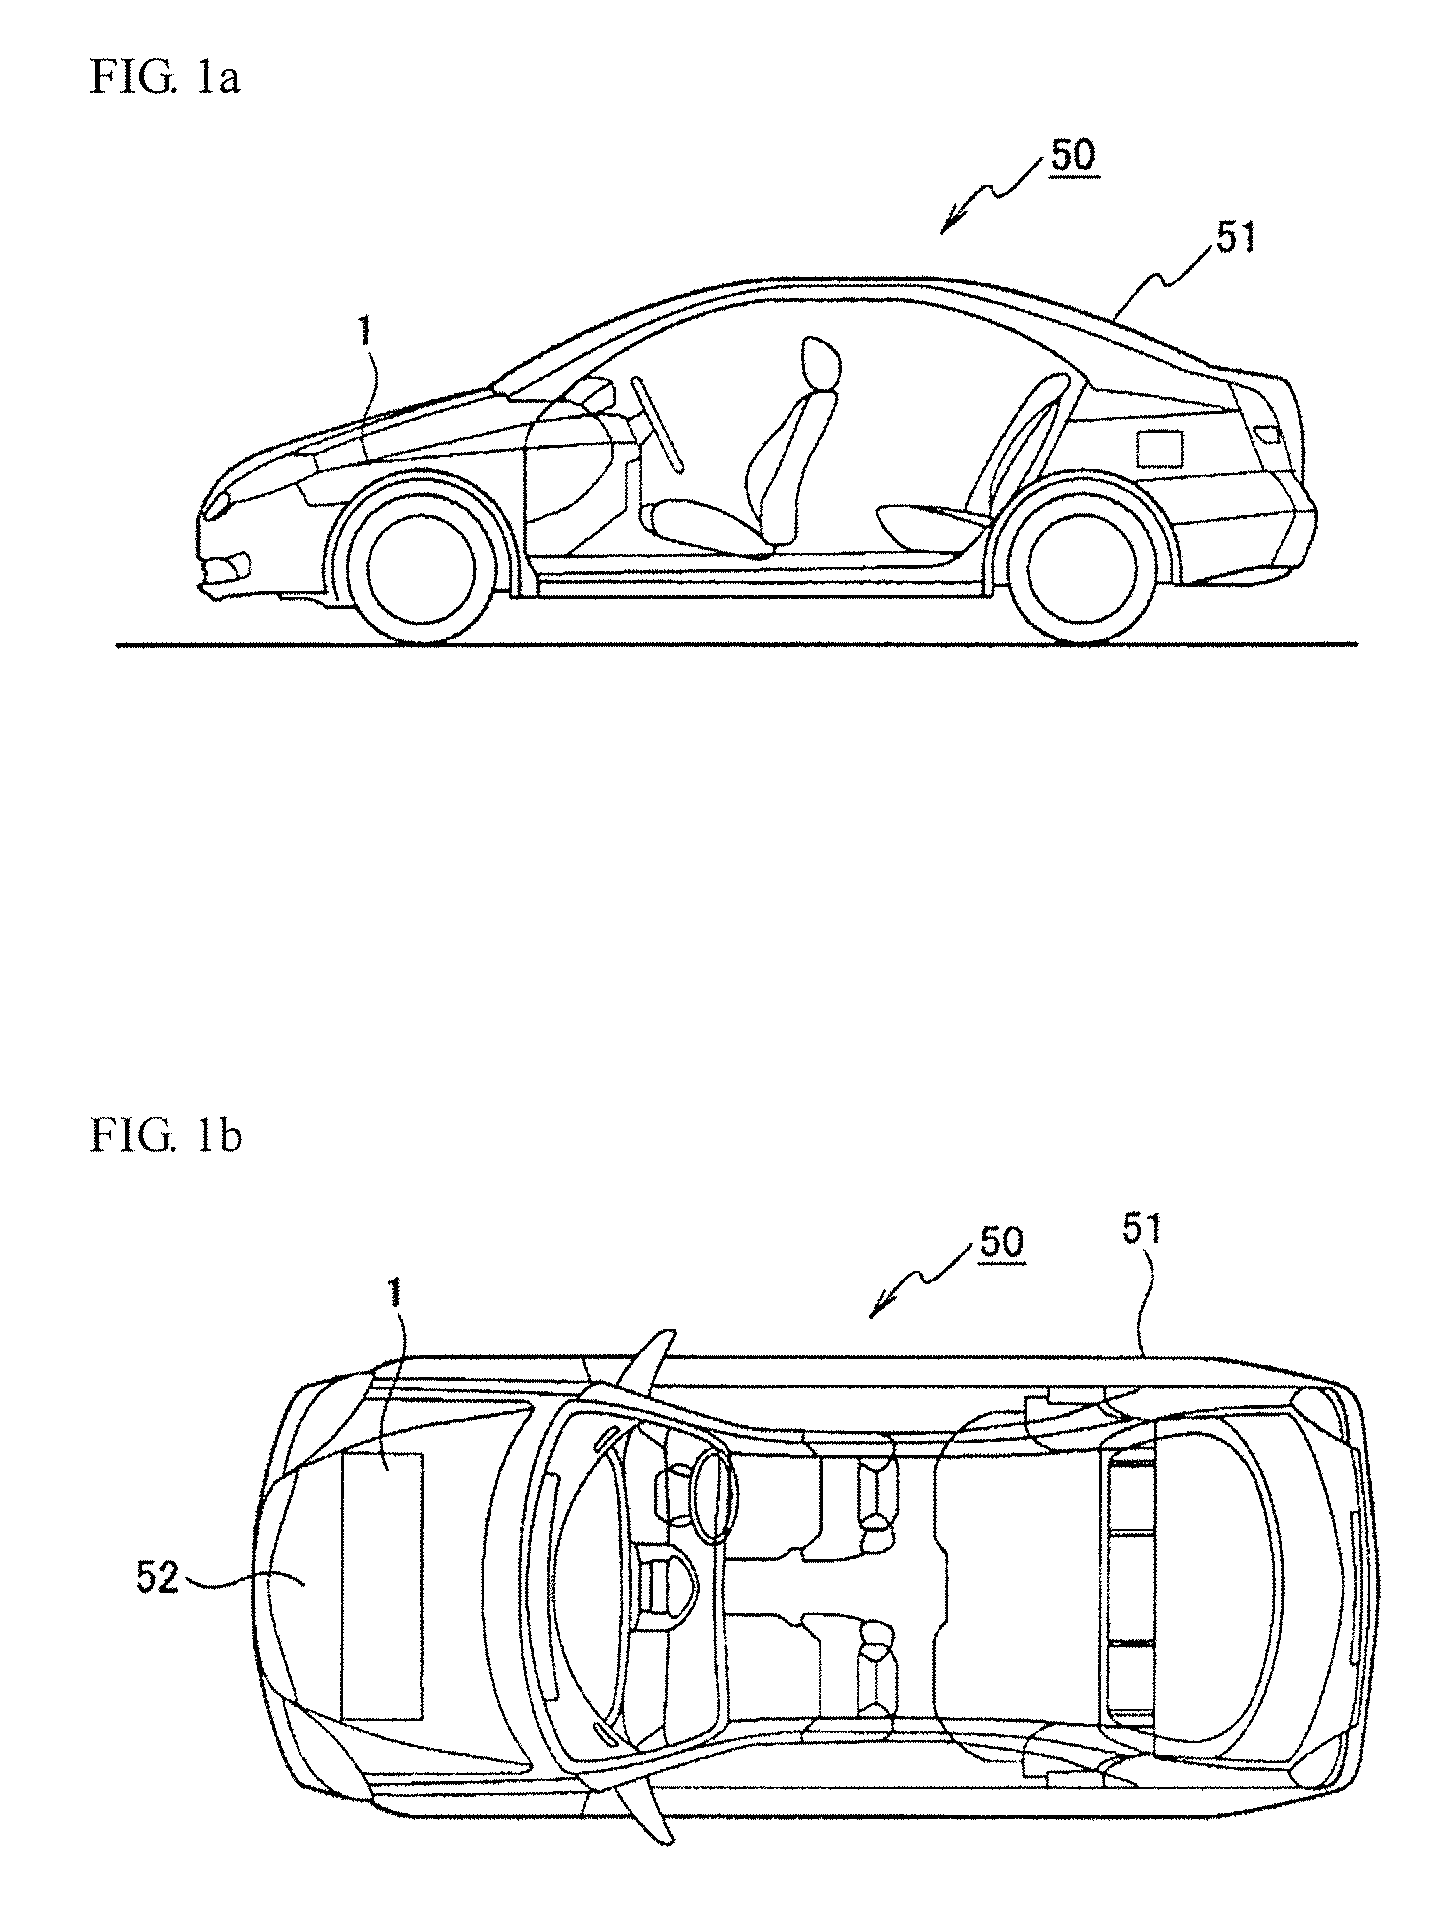 Roof Structure of a Vehicular Body